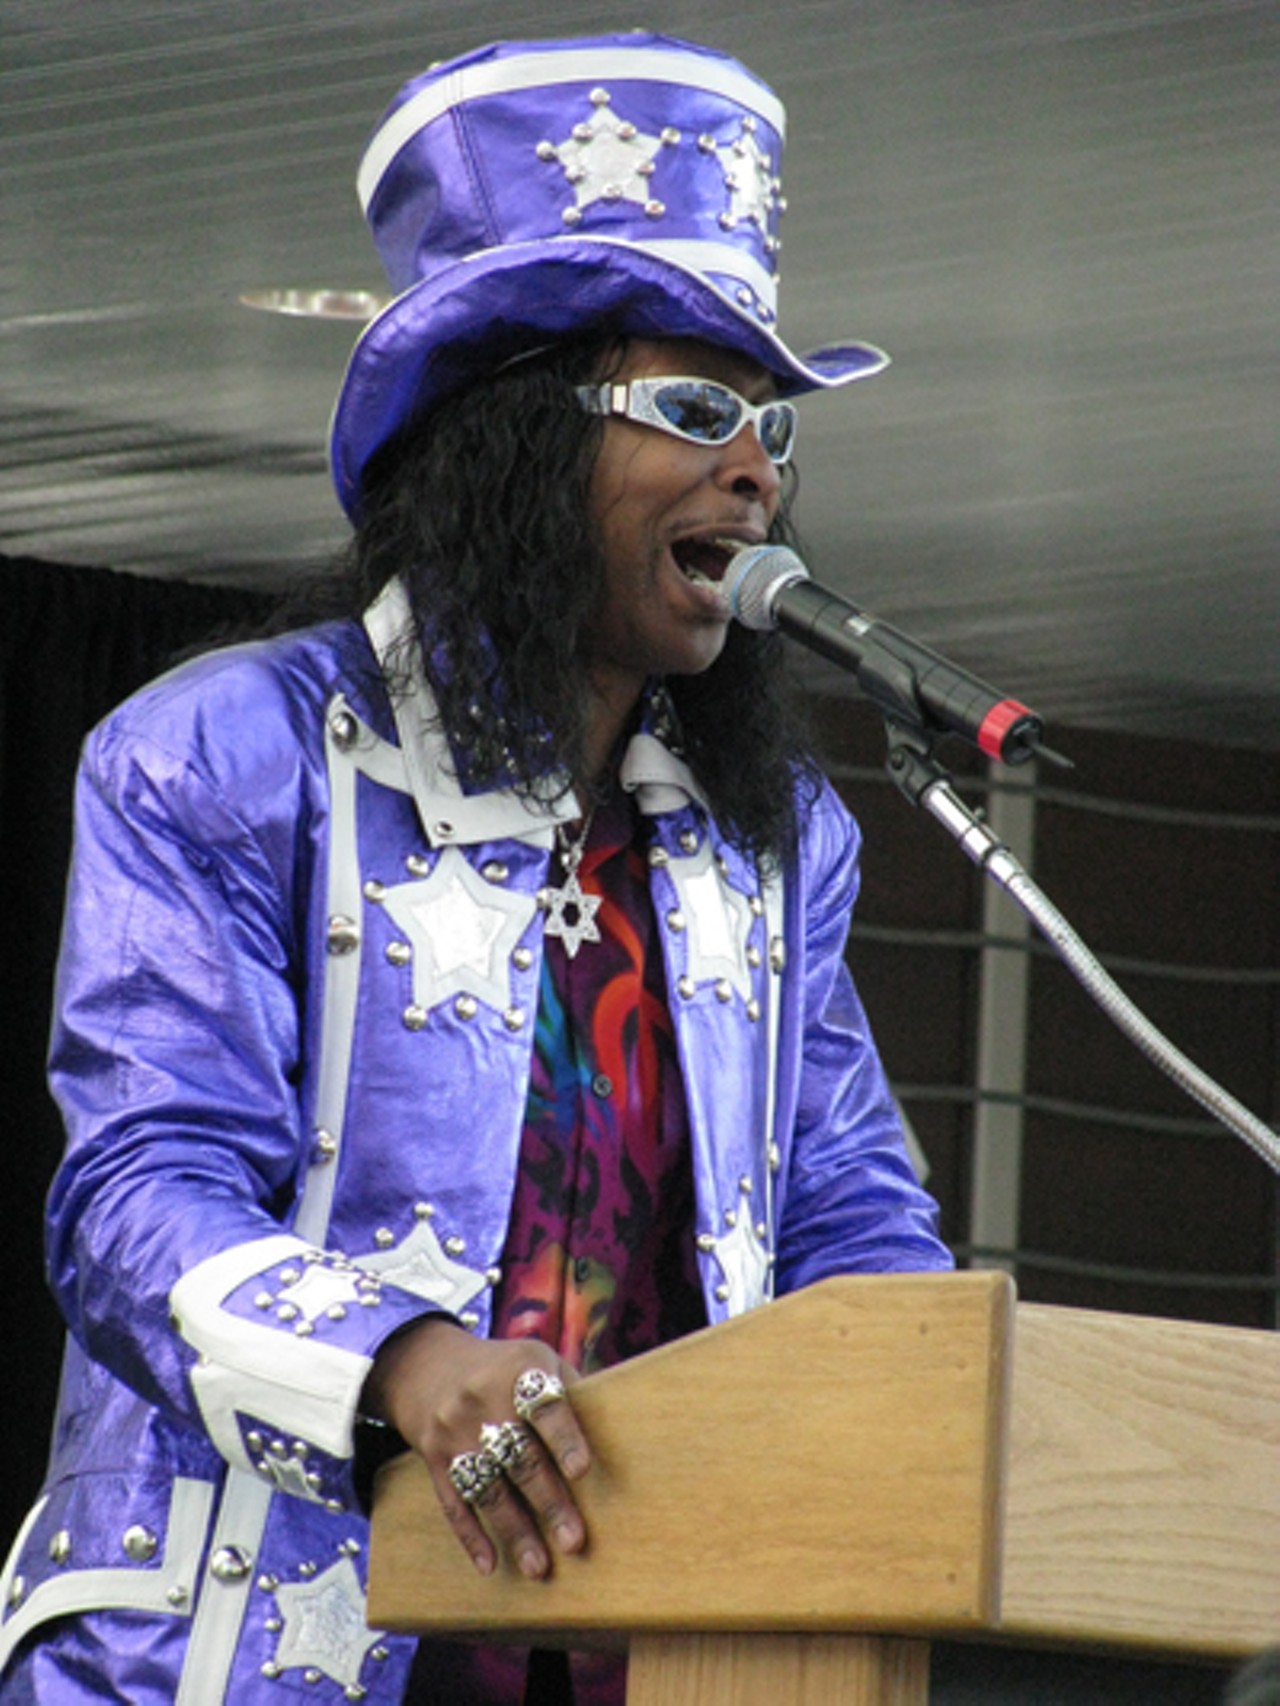 Bootsy Collins is one of many musicians with ties to Ohio. People born in the Cleveland area include Michael Stanley, Tracy Chapman and Marc Cohn. Nine Inch Nails&rsquo; Trent Reznor and Filter&rsquo;s Richard Patrick spent formative musical years in the city, while Scott Weiland lived in nearby Chagrin Falls. Both Marilyn Manson and Macy Gray were born in Canton, which is about an hour south of Cleveland.